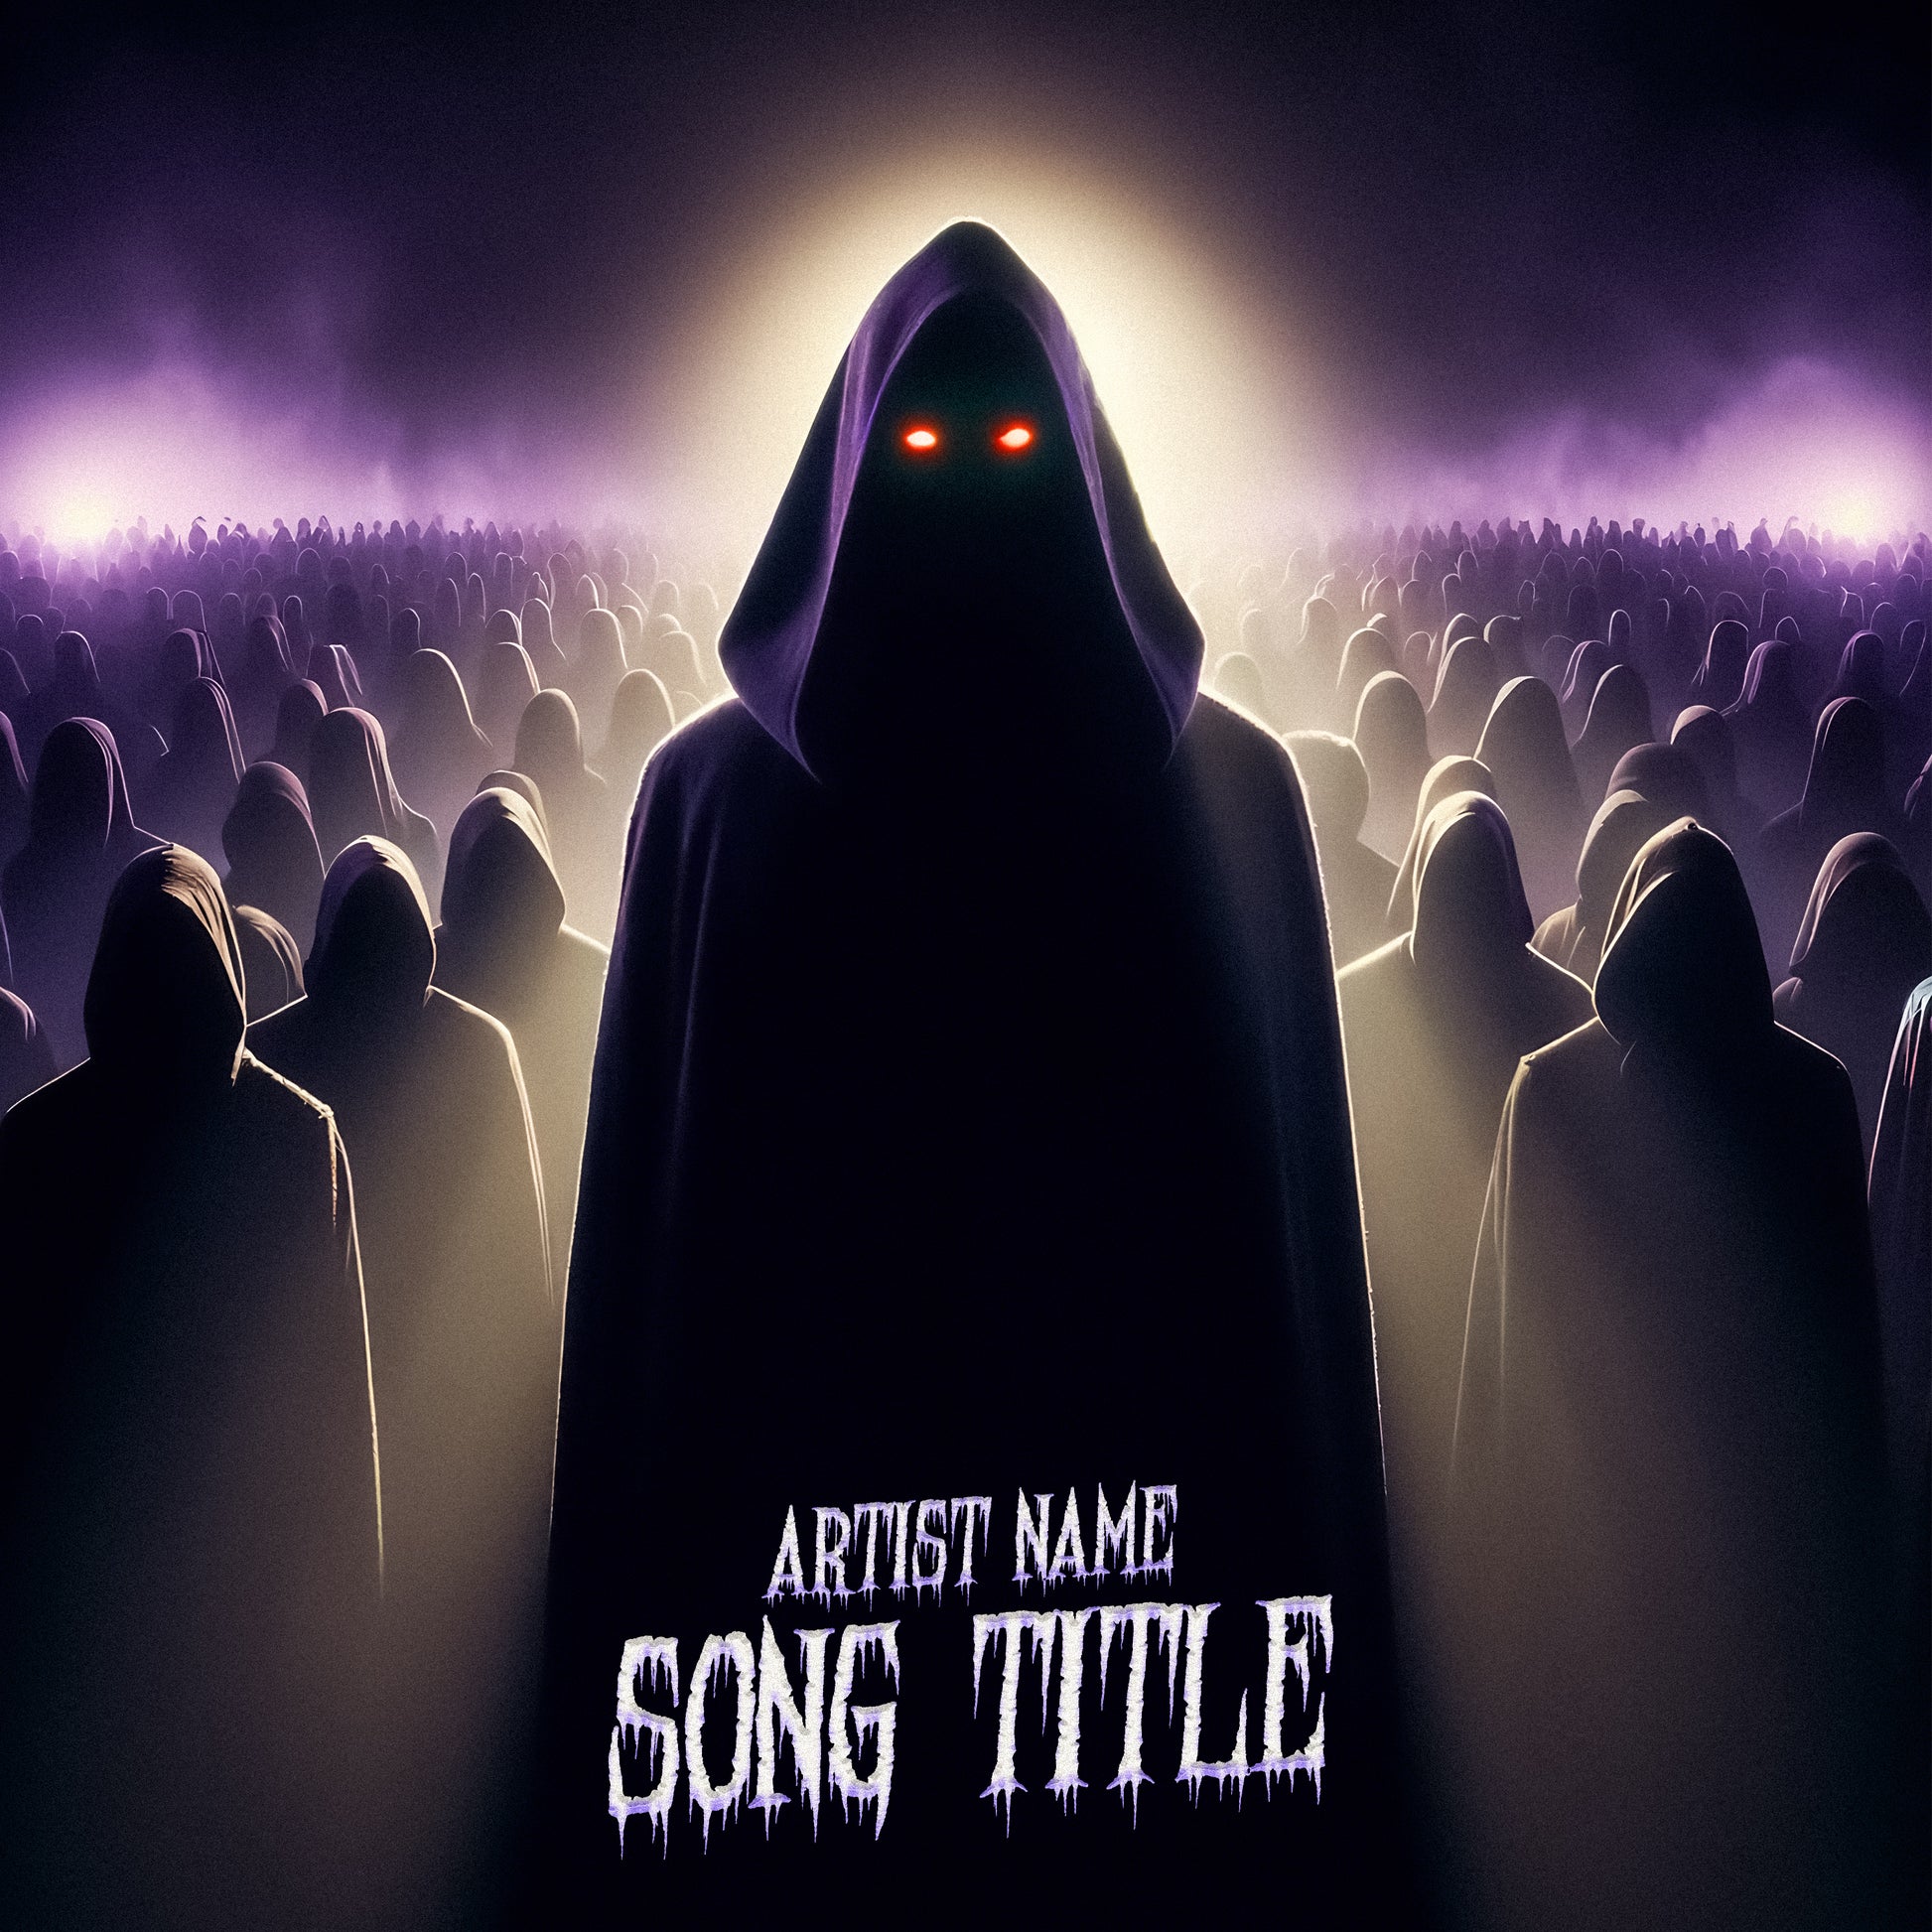 Mysterious figure with glowing red eyes in a crowd – Cover Art Design